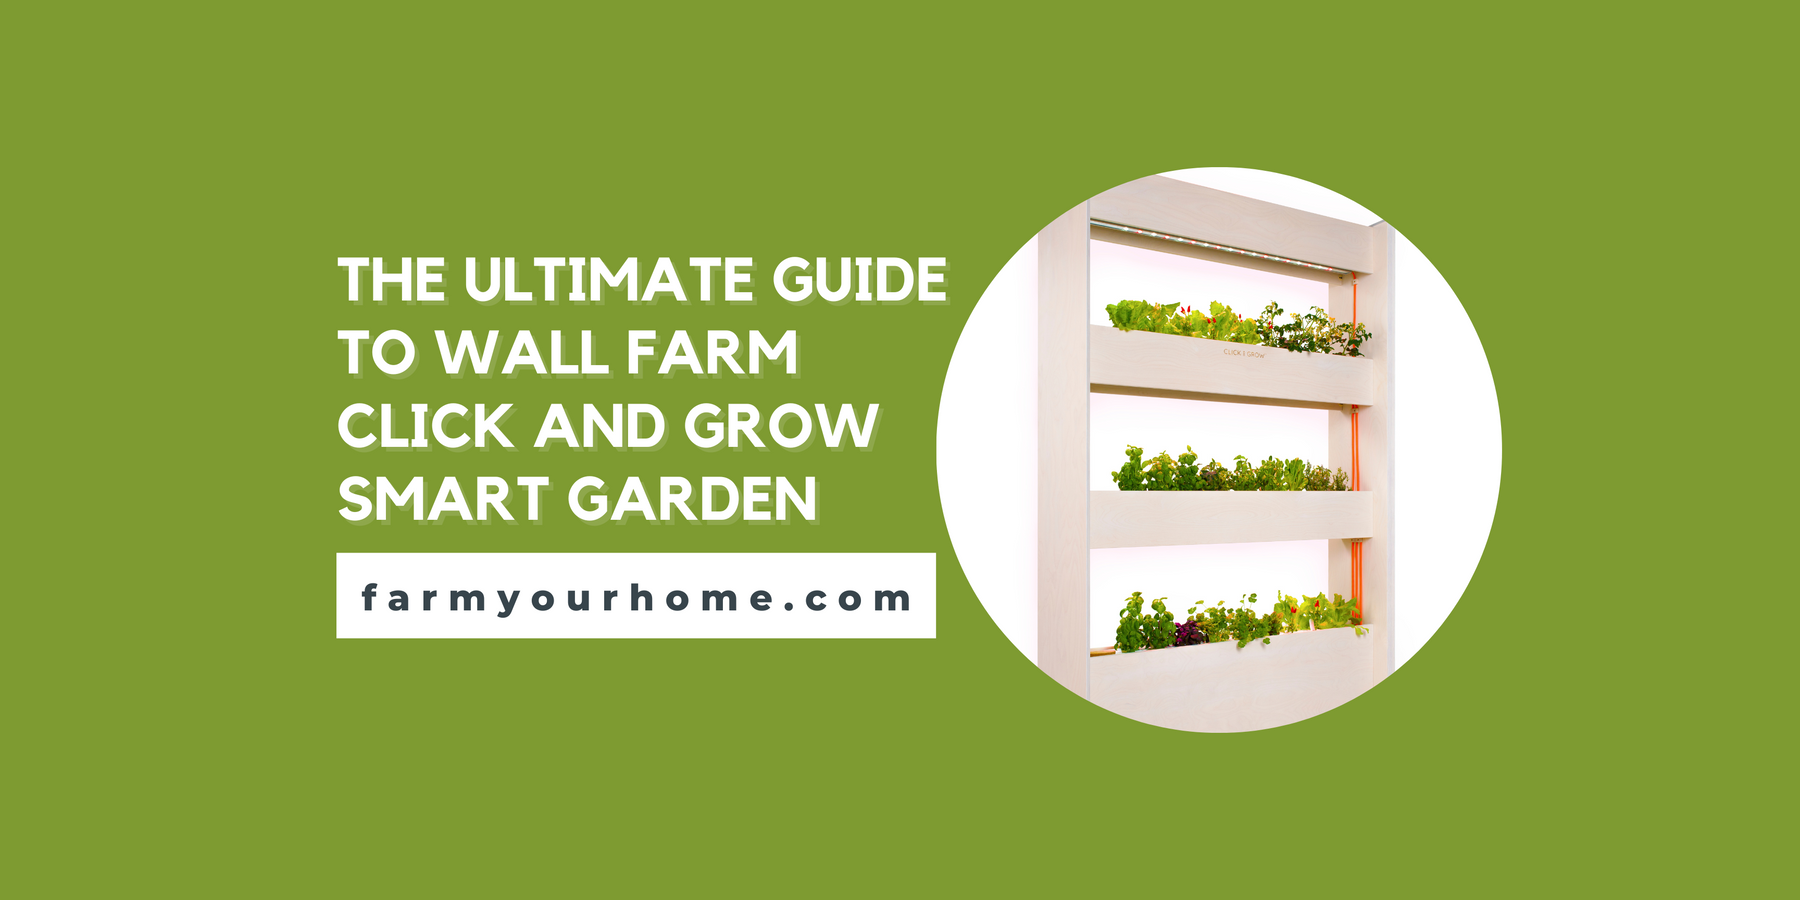 The Ultimate Guide to Wall Farm Click and Grow Smart Garden Blog Post